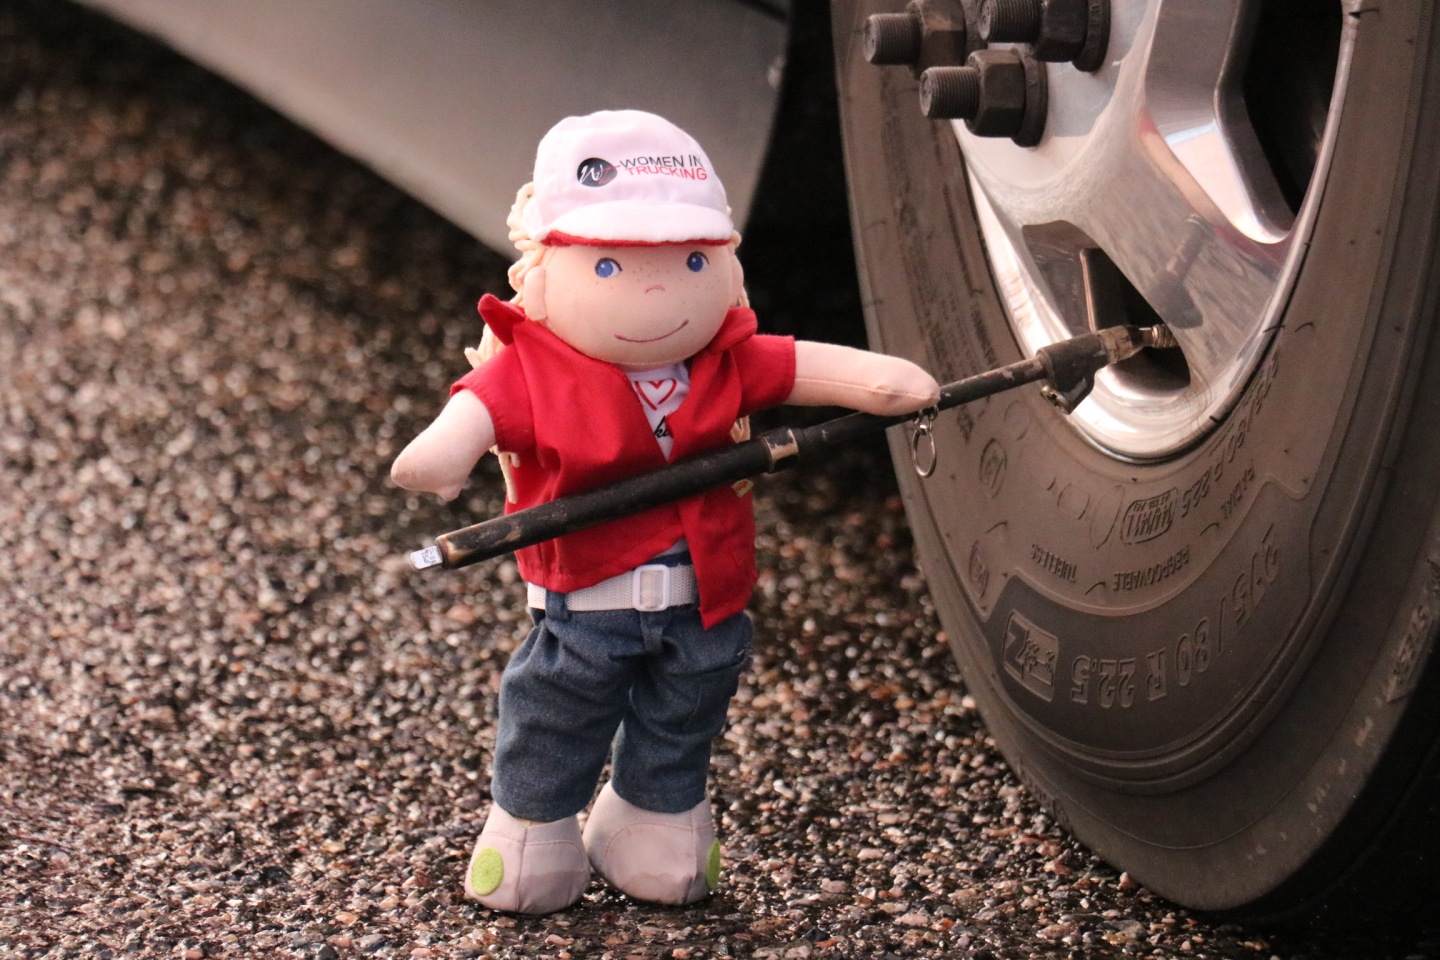 Clare doll checking the tire pressure of a truck.